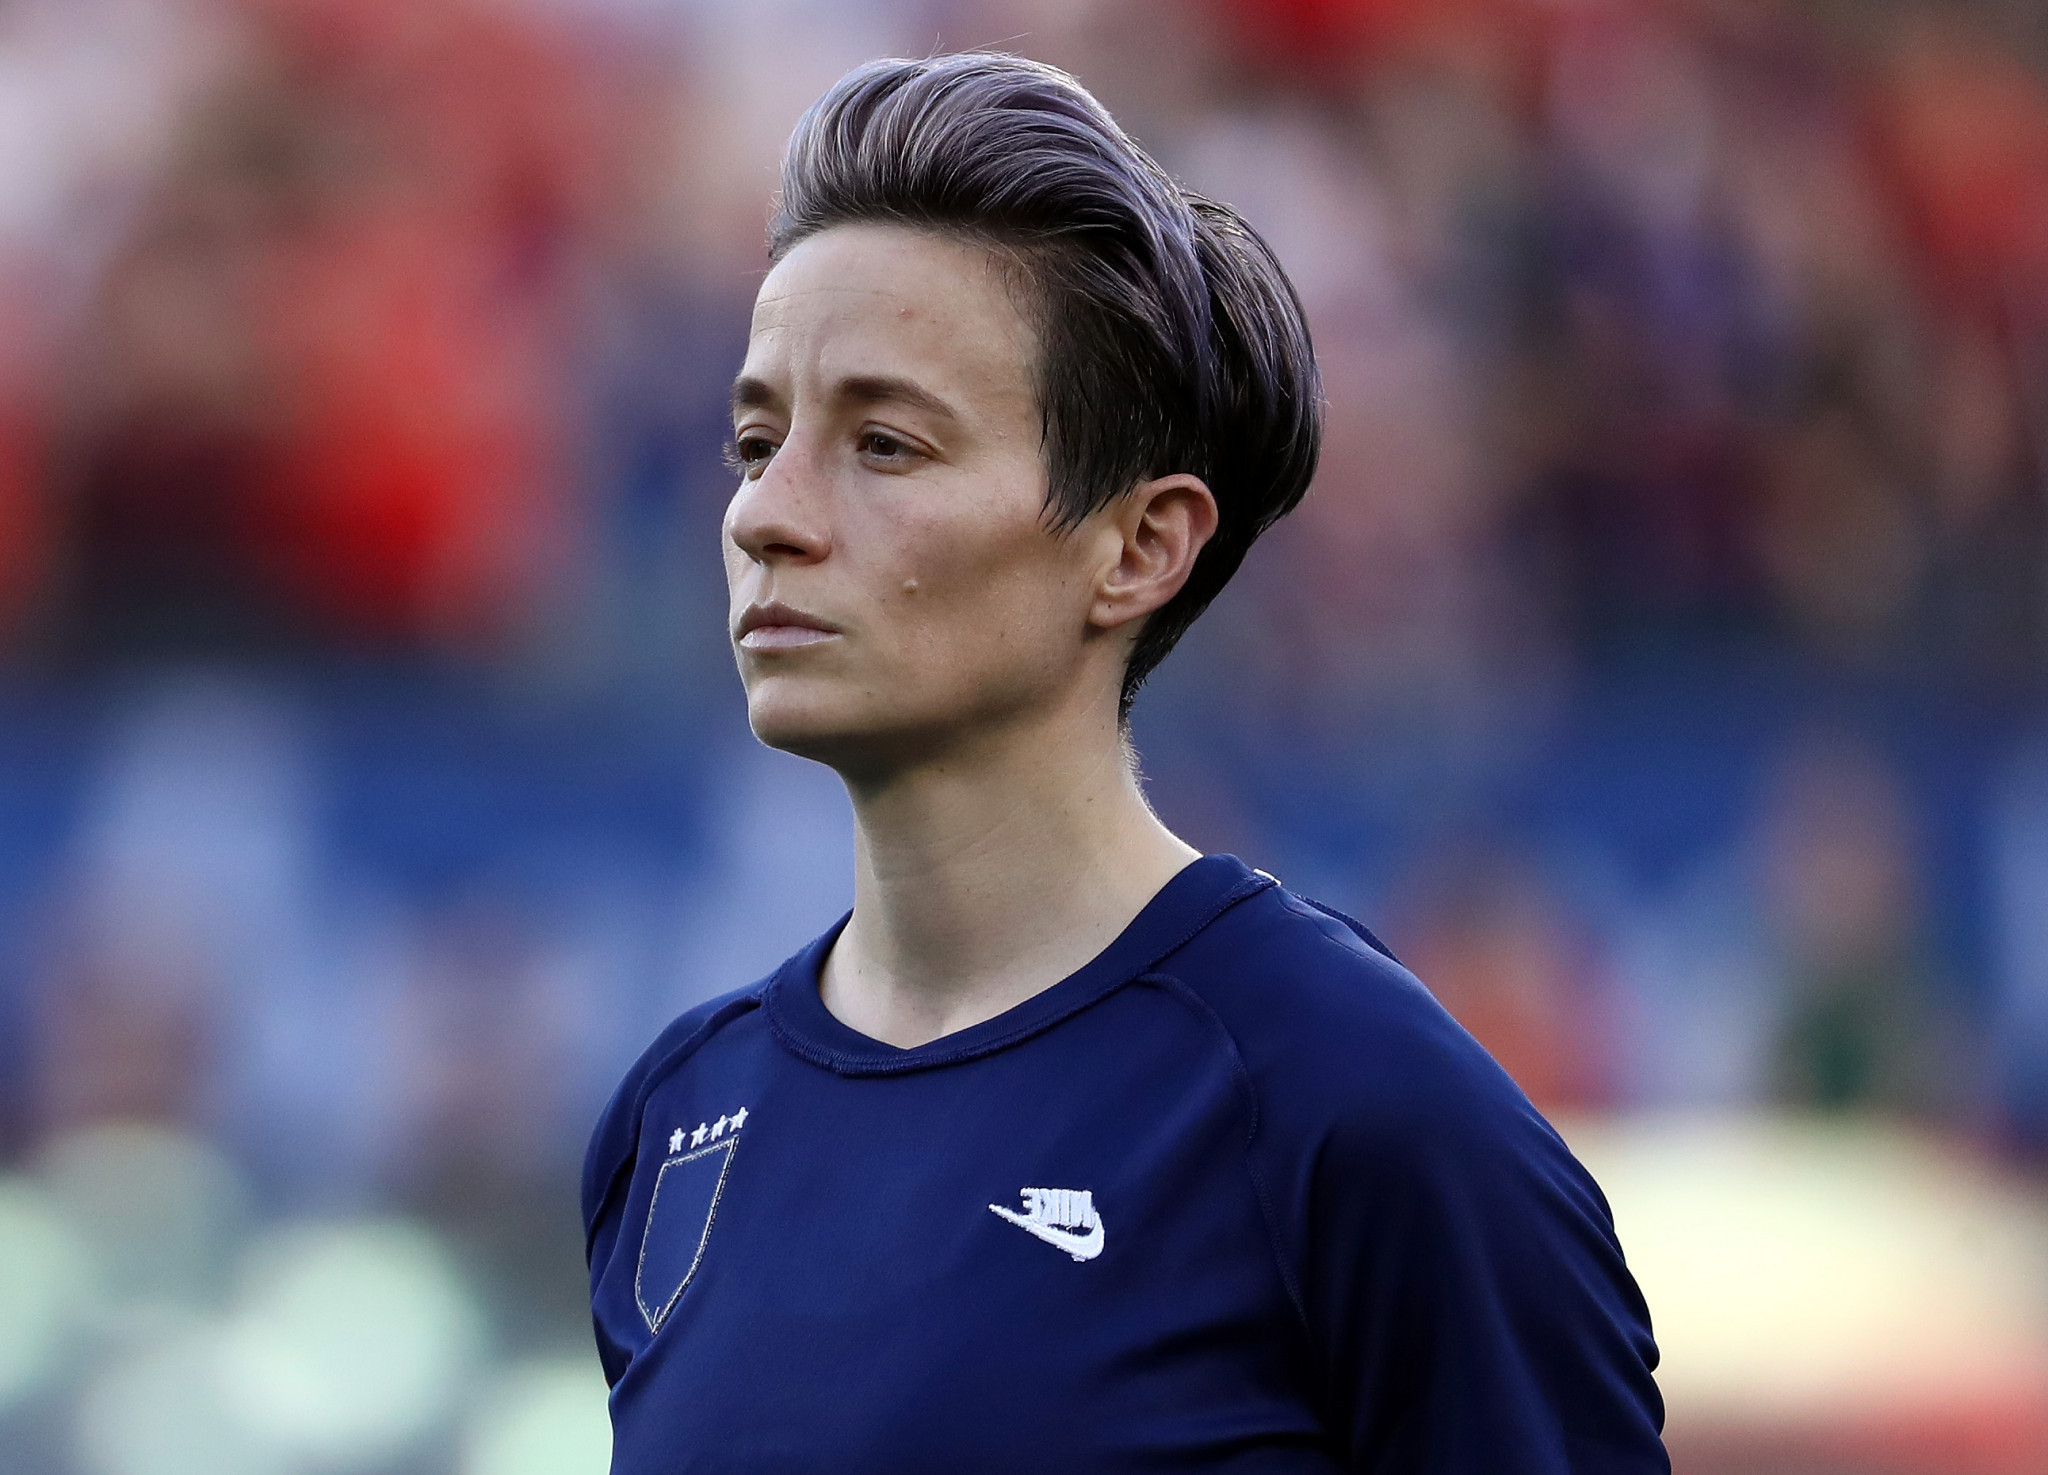 Megan Rapinoe is among the signatories of a letter calling for events to be removed from Idaho ©Getty Images